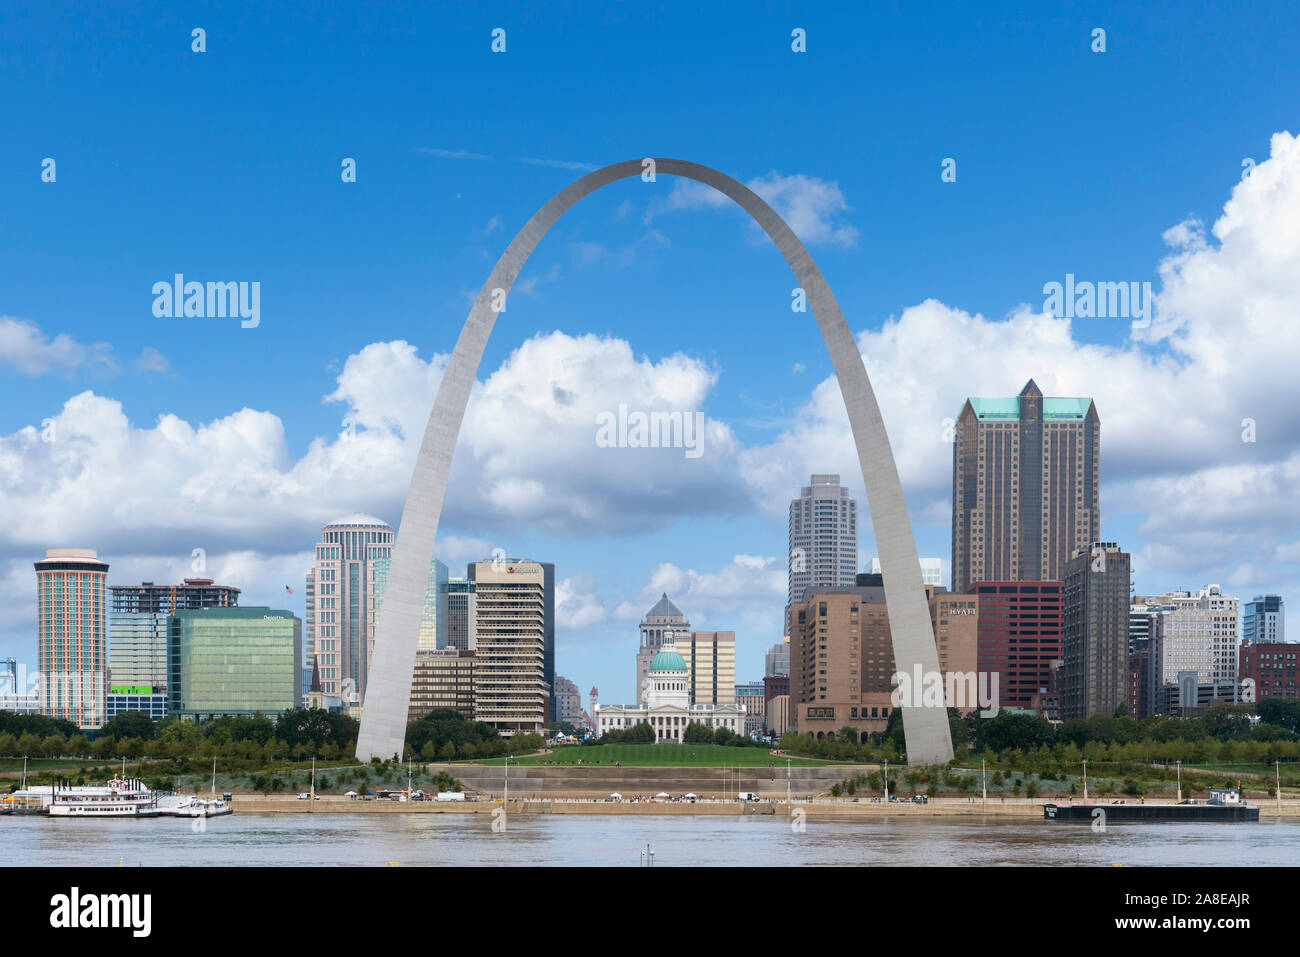 View of the St Louis skyline from across the Mississippi River with the Gateway Arch framing the Old Courthouse, Saint Louis, Missouri, USA Stock Photo